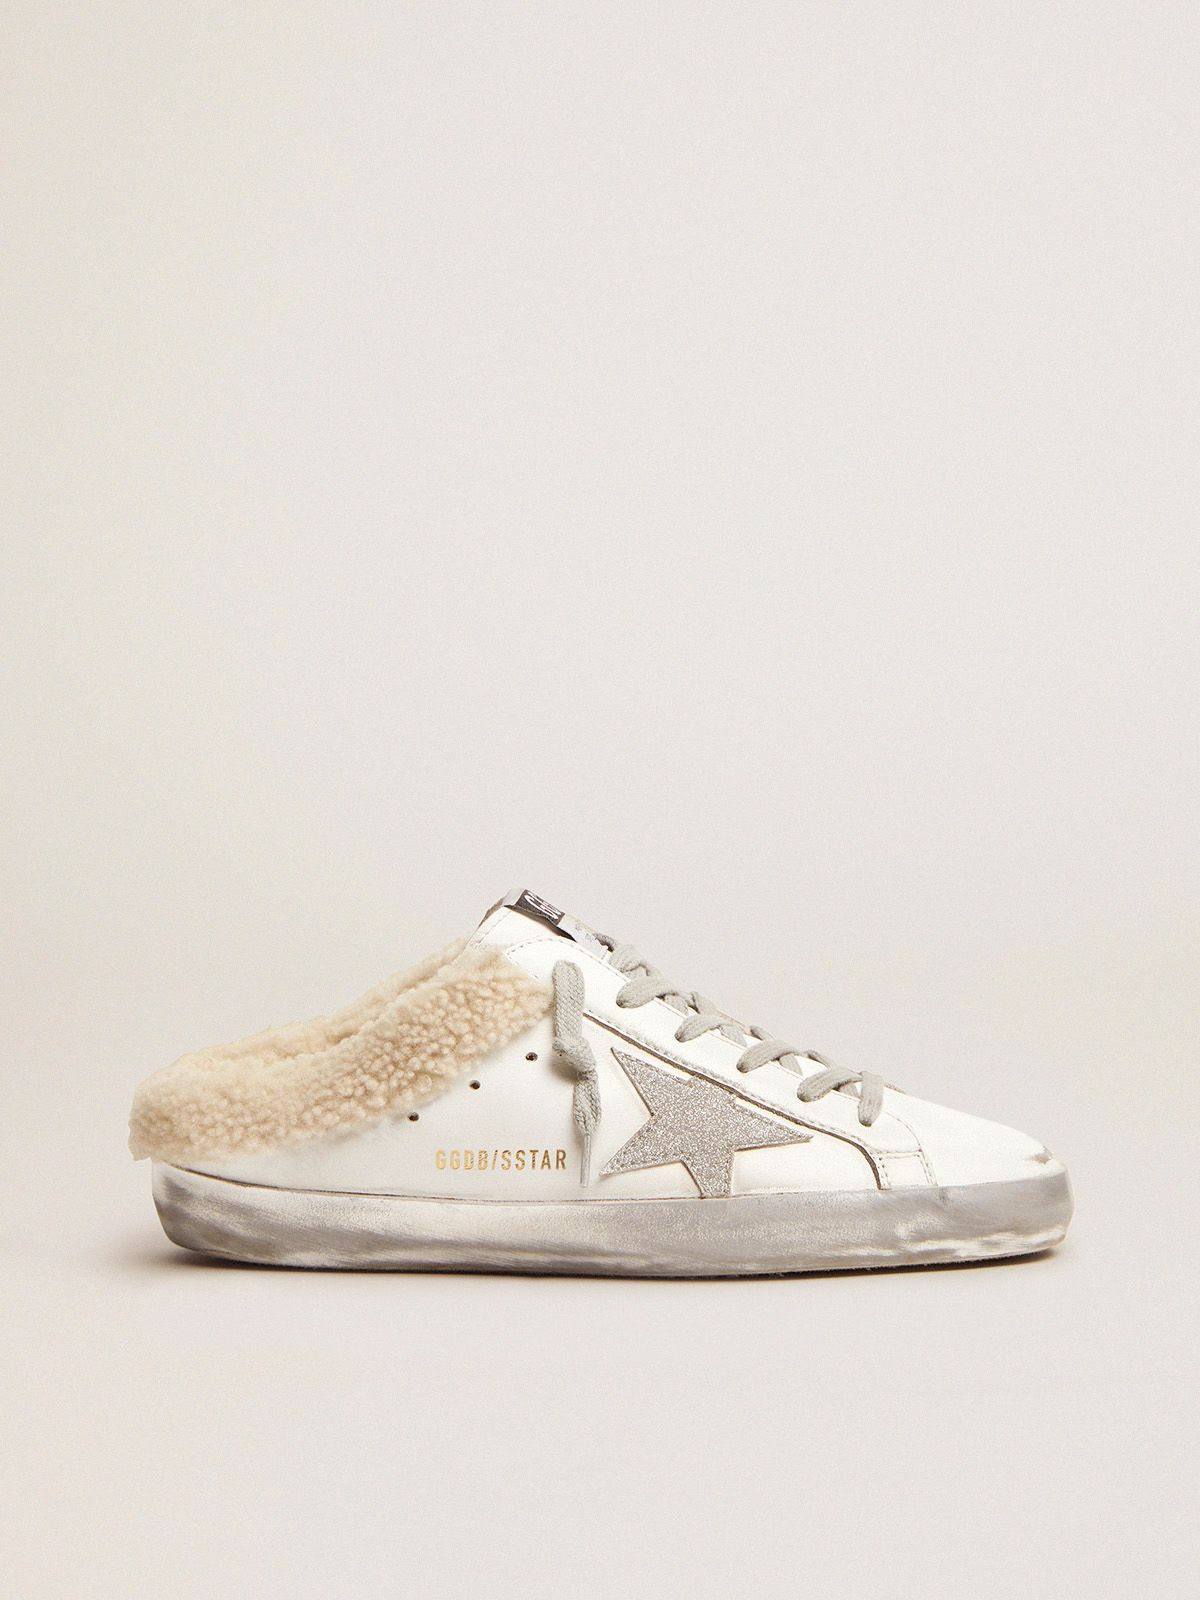 golden goose lining shearling with in Super-Star Sabots white leather